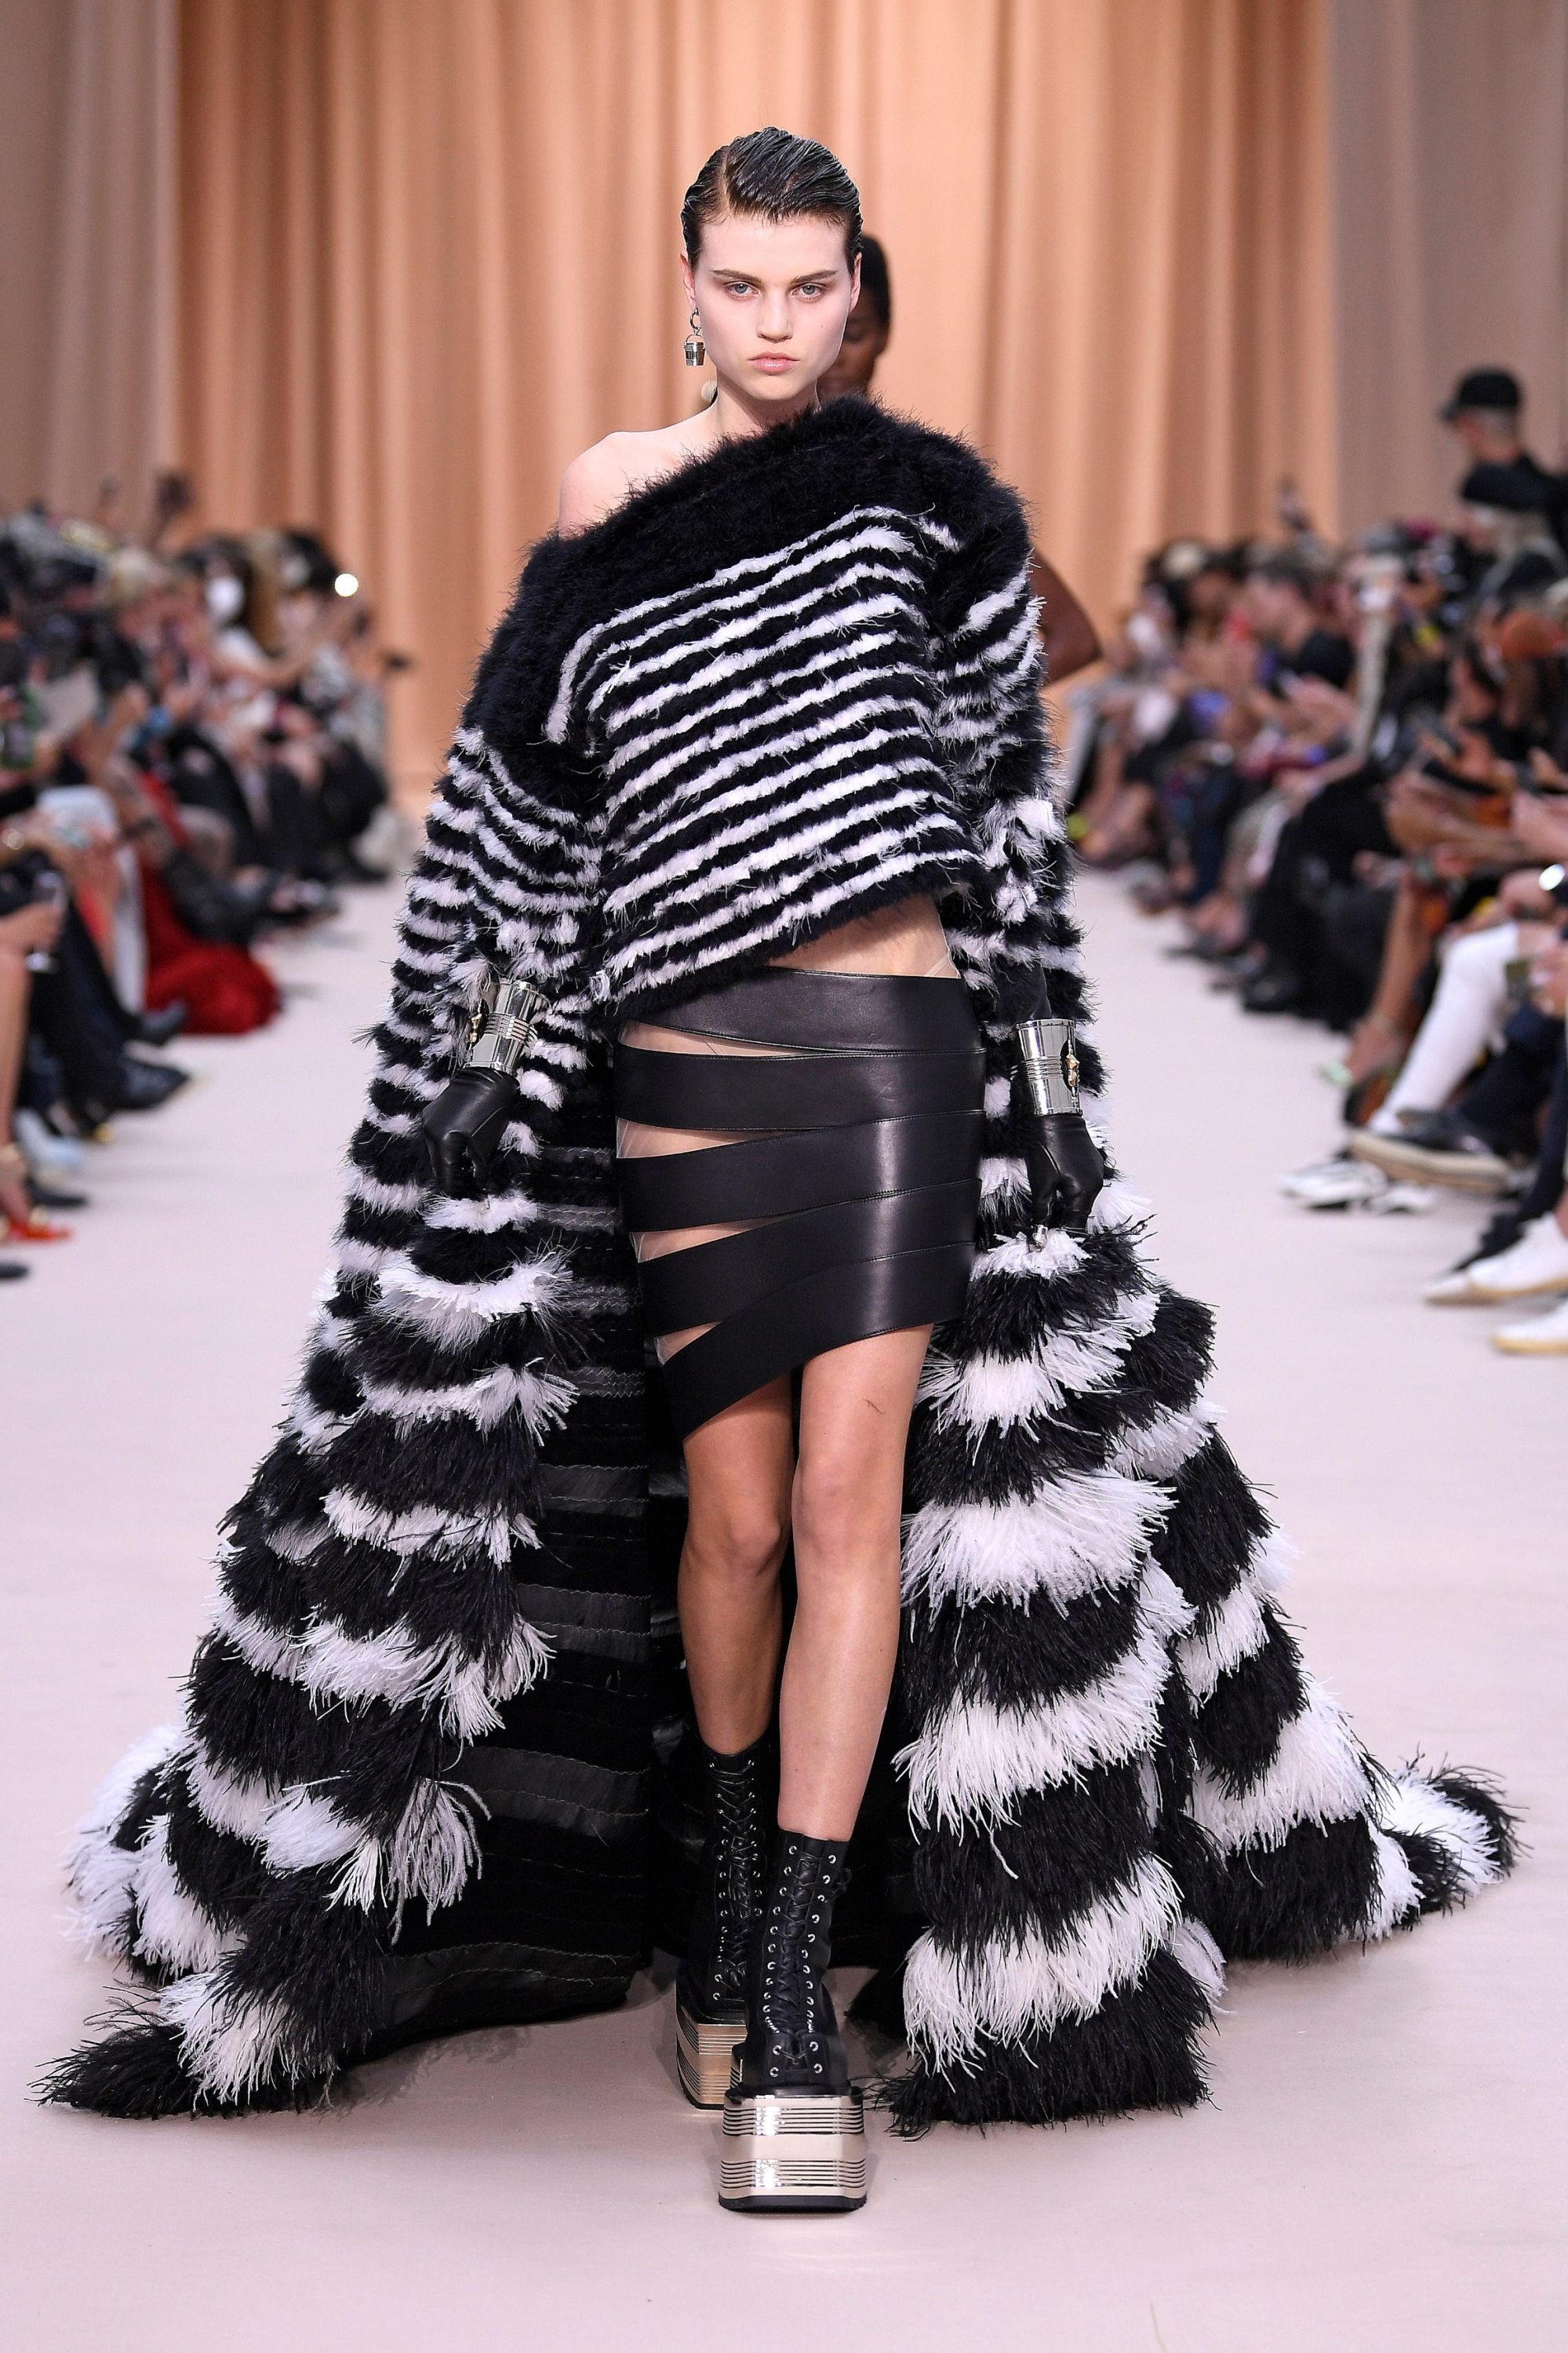 Inside Balmain's Haute Couture revival with Olivier Rousteing